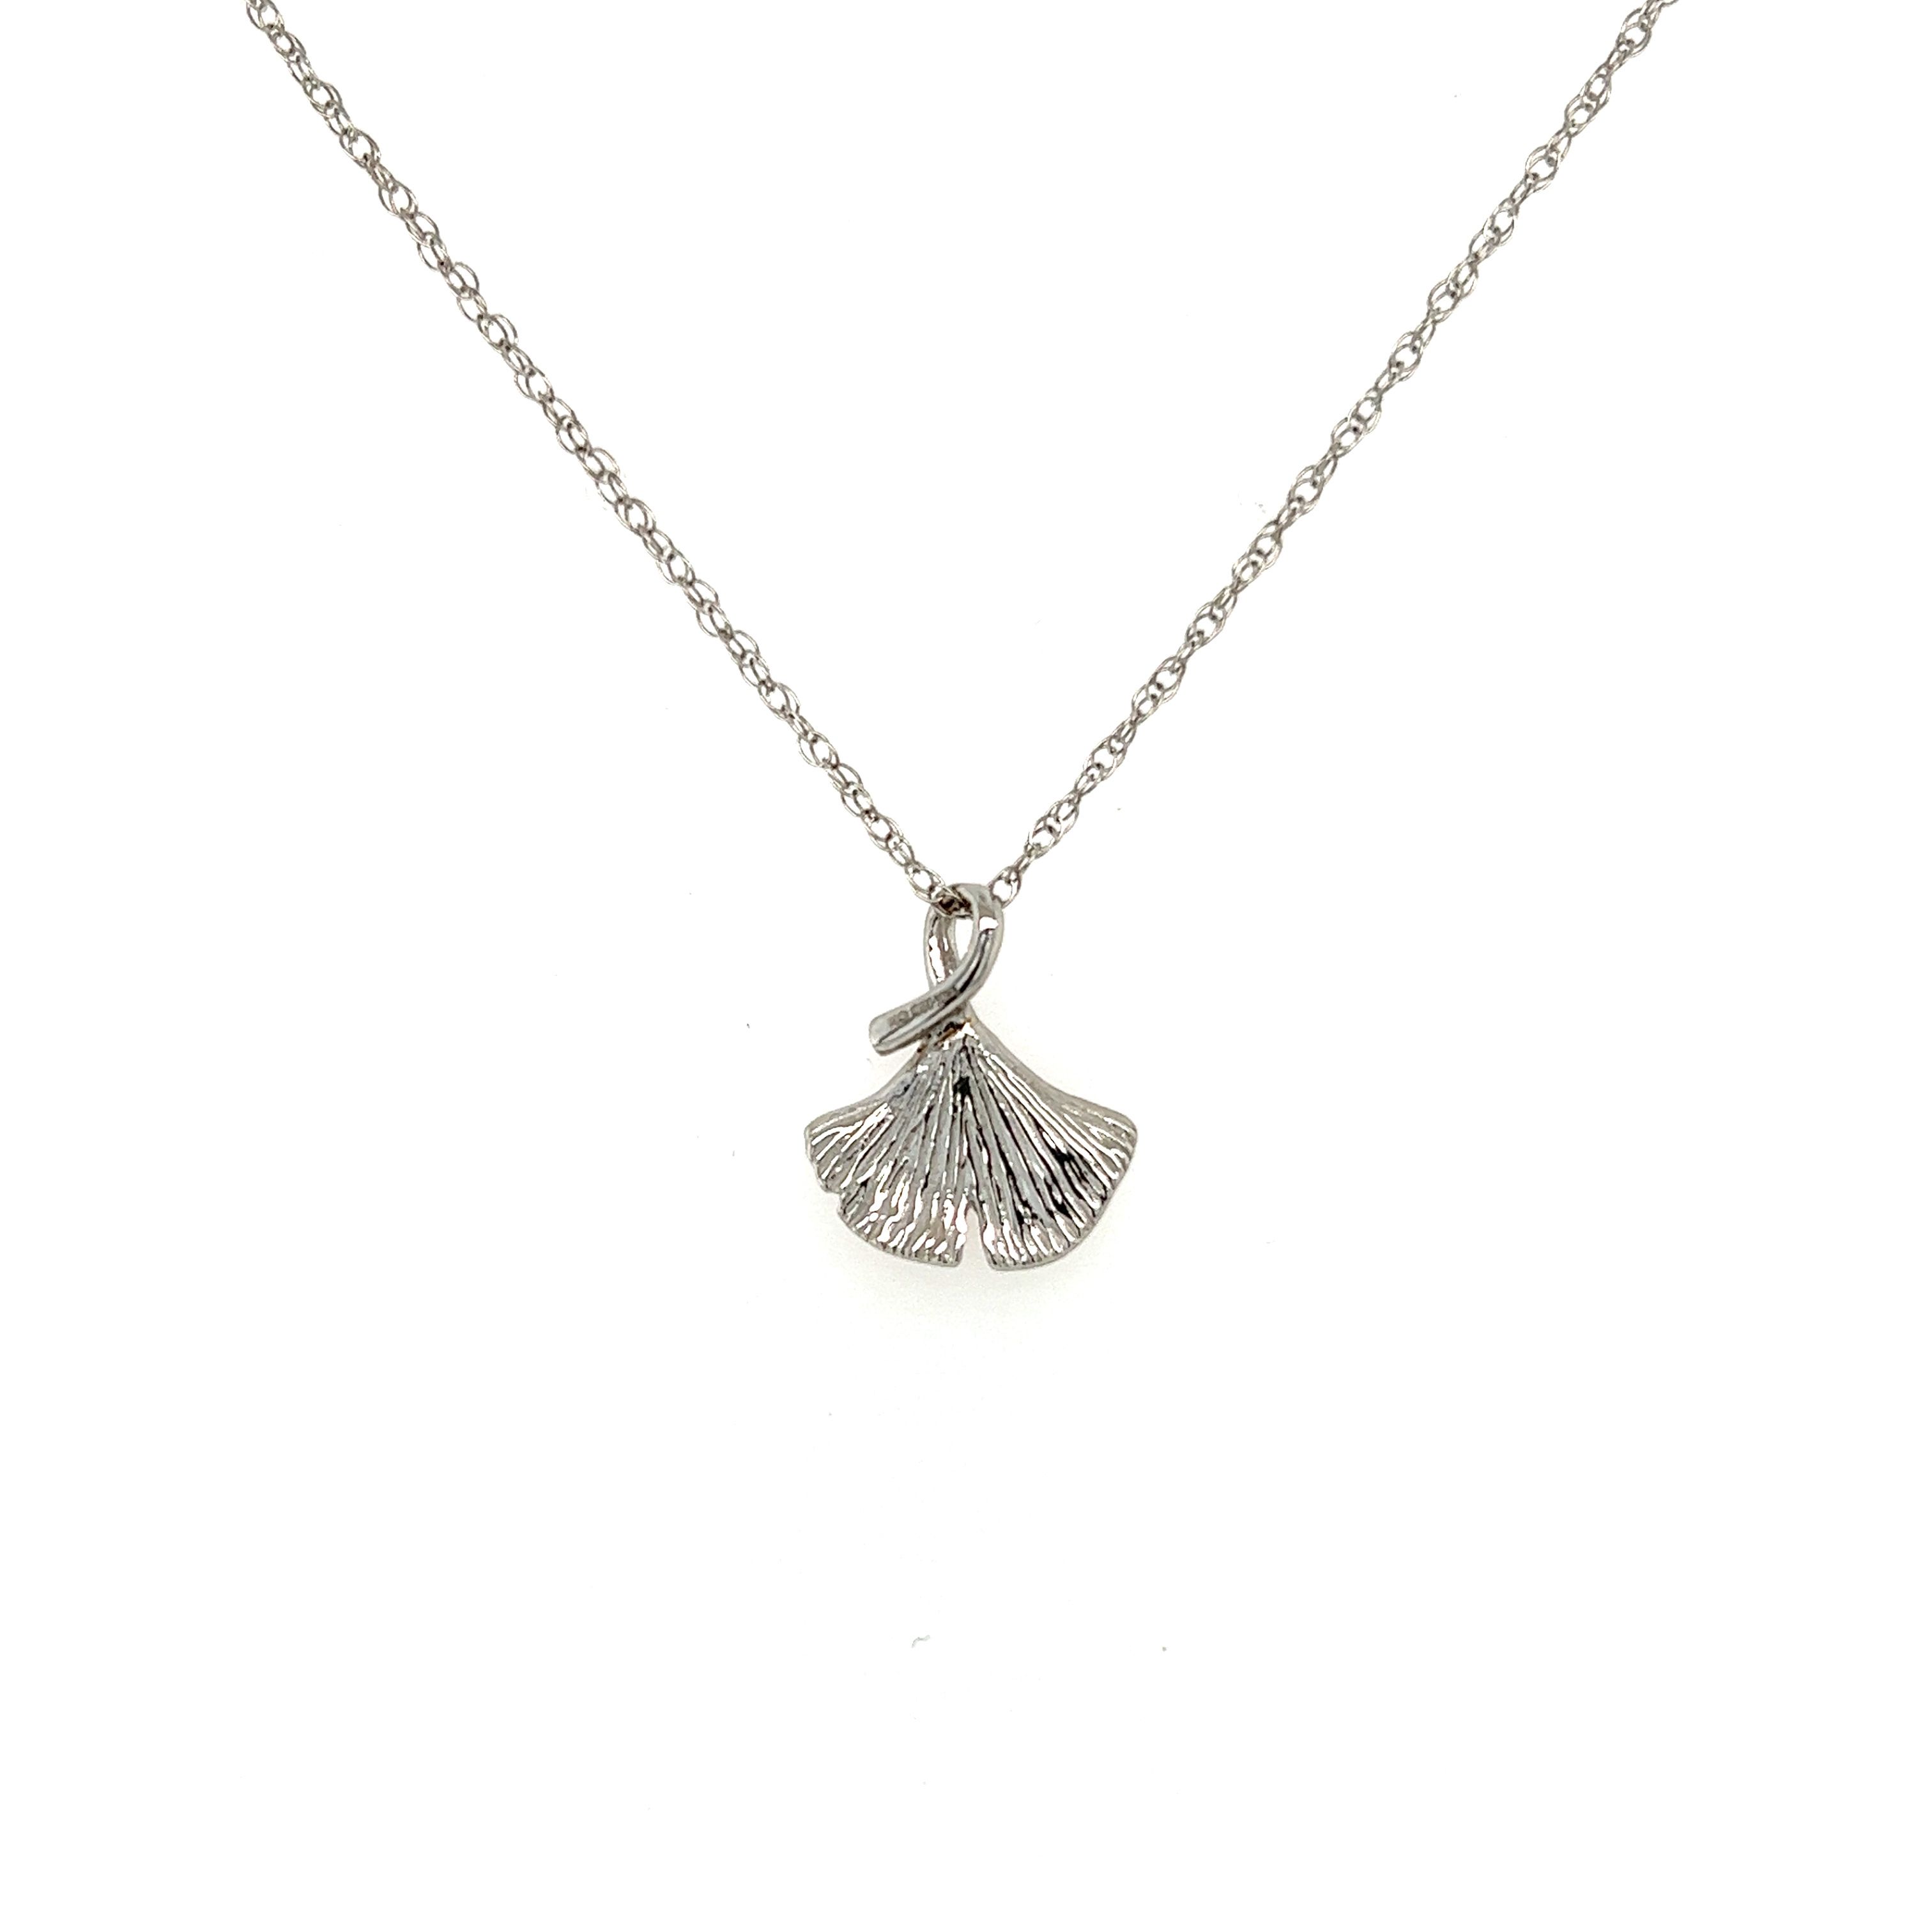 14 k white gold ginko leaf pendant with COLONIAL CHAIN (100)